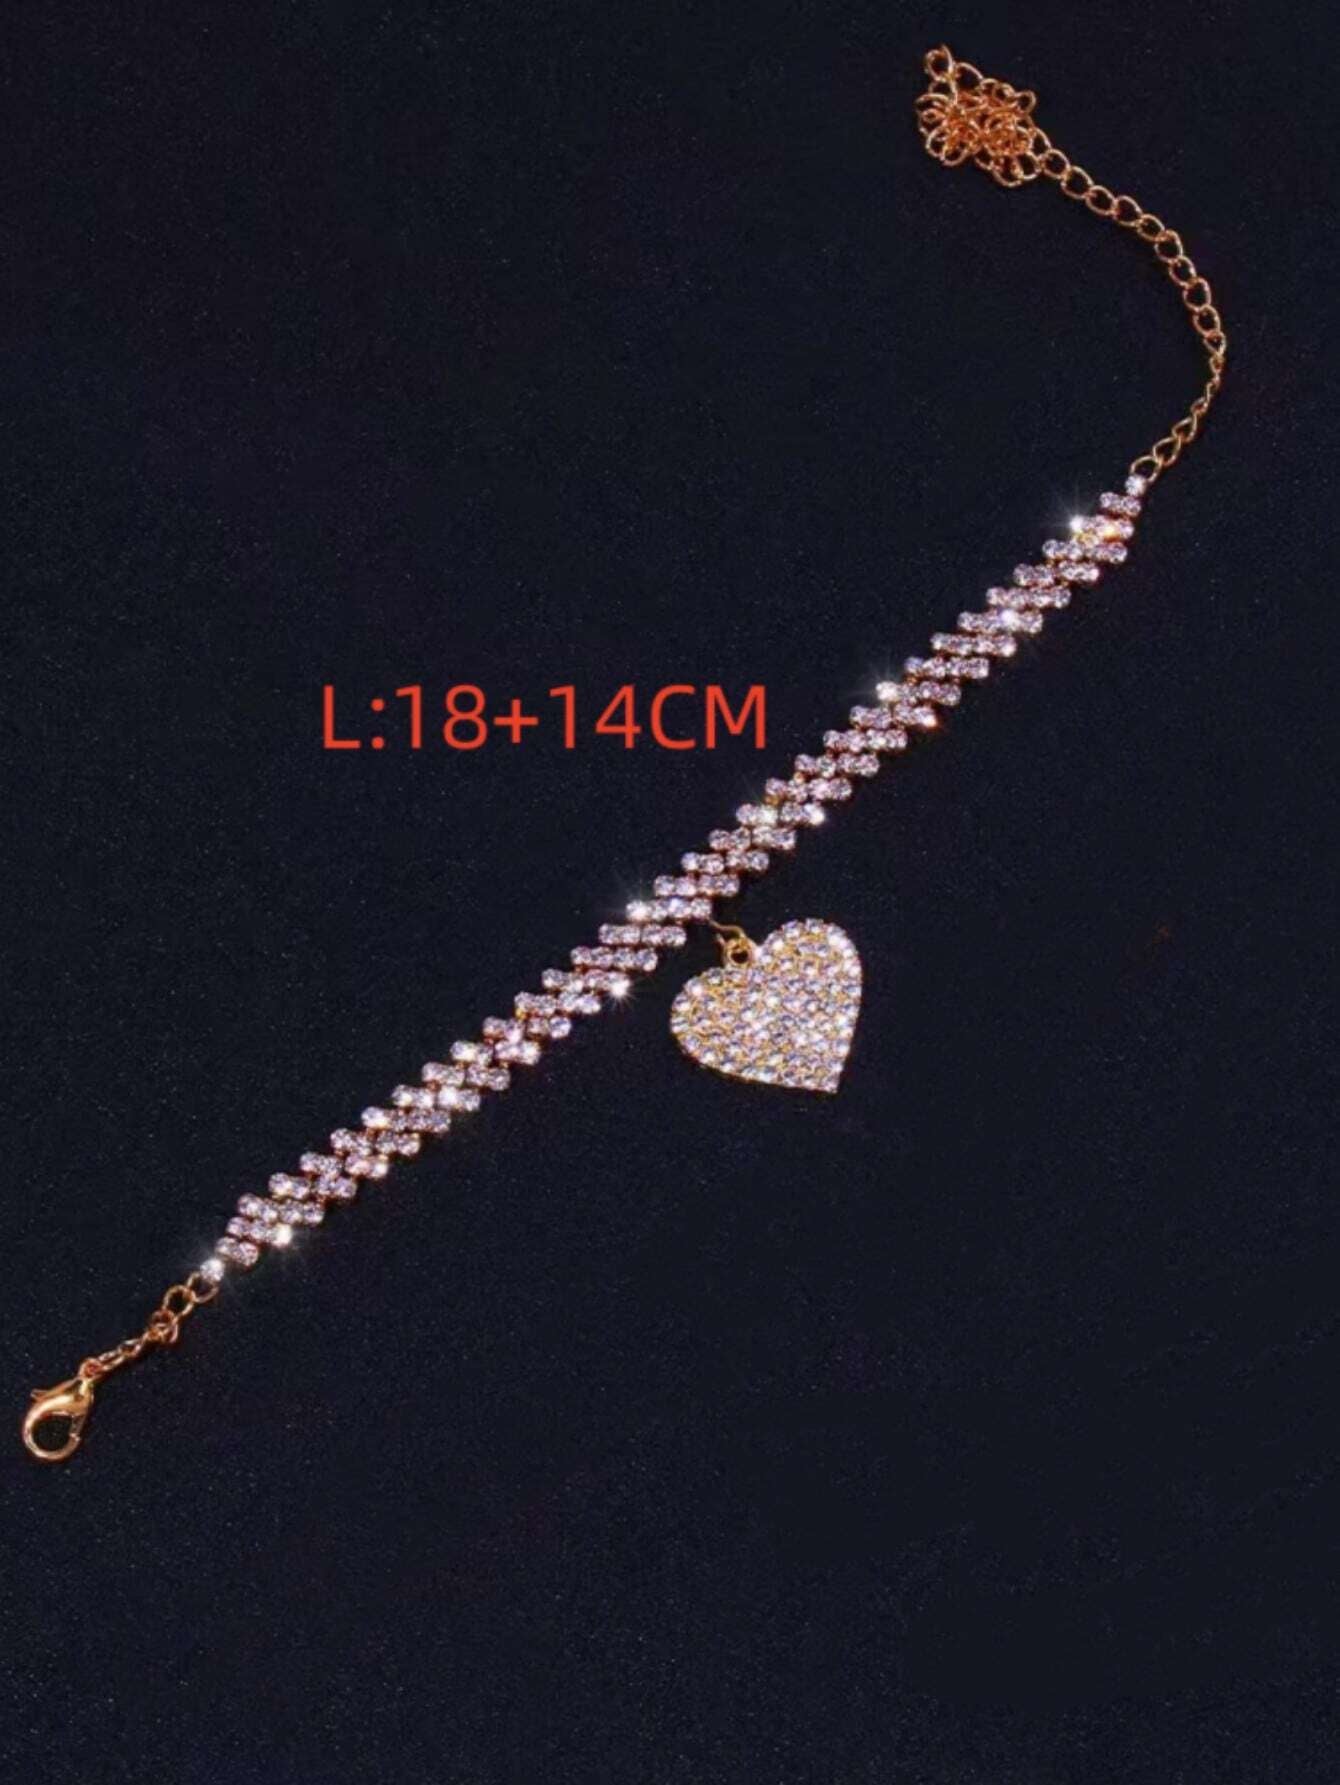 Heart Shaped Pendant Necklace/Anklet with Sparkling Rhinestones: A Women's Jewelry Gift, Foot Chain, and Bracelet Accessory